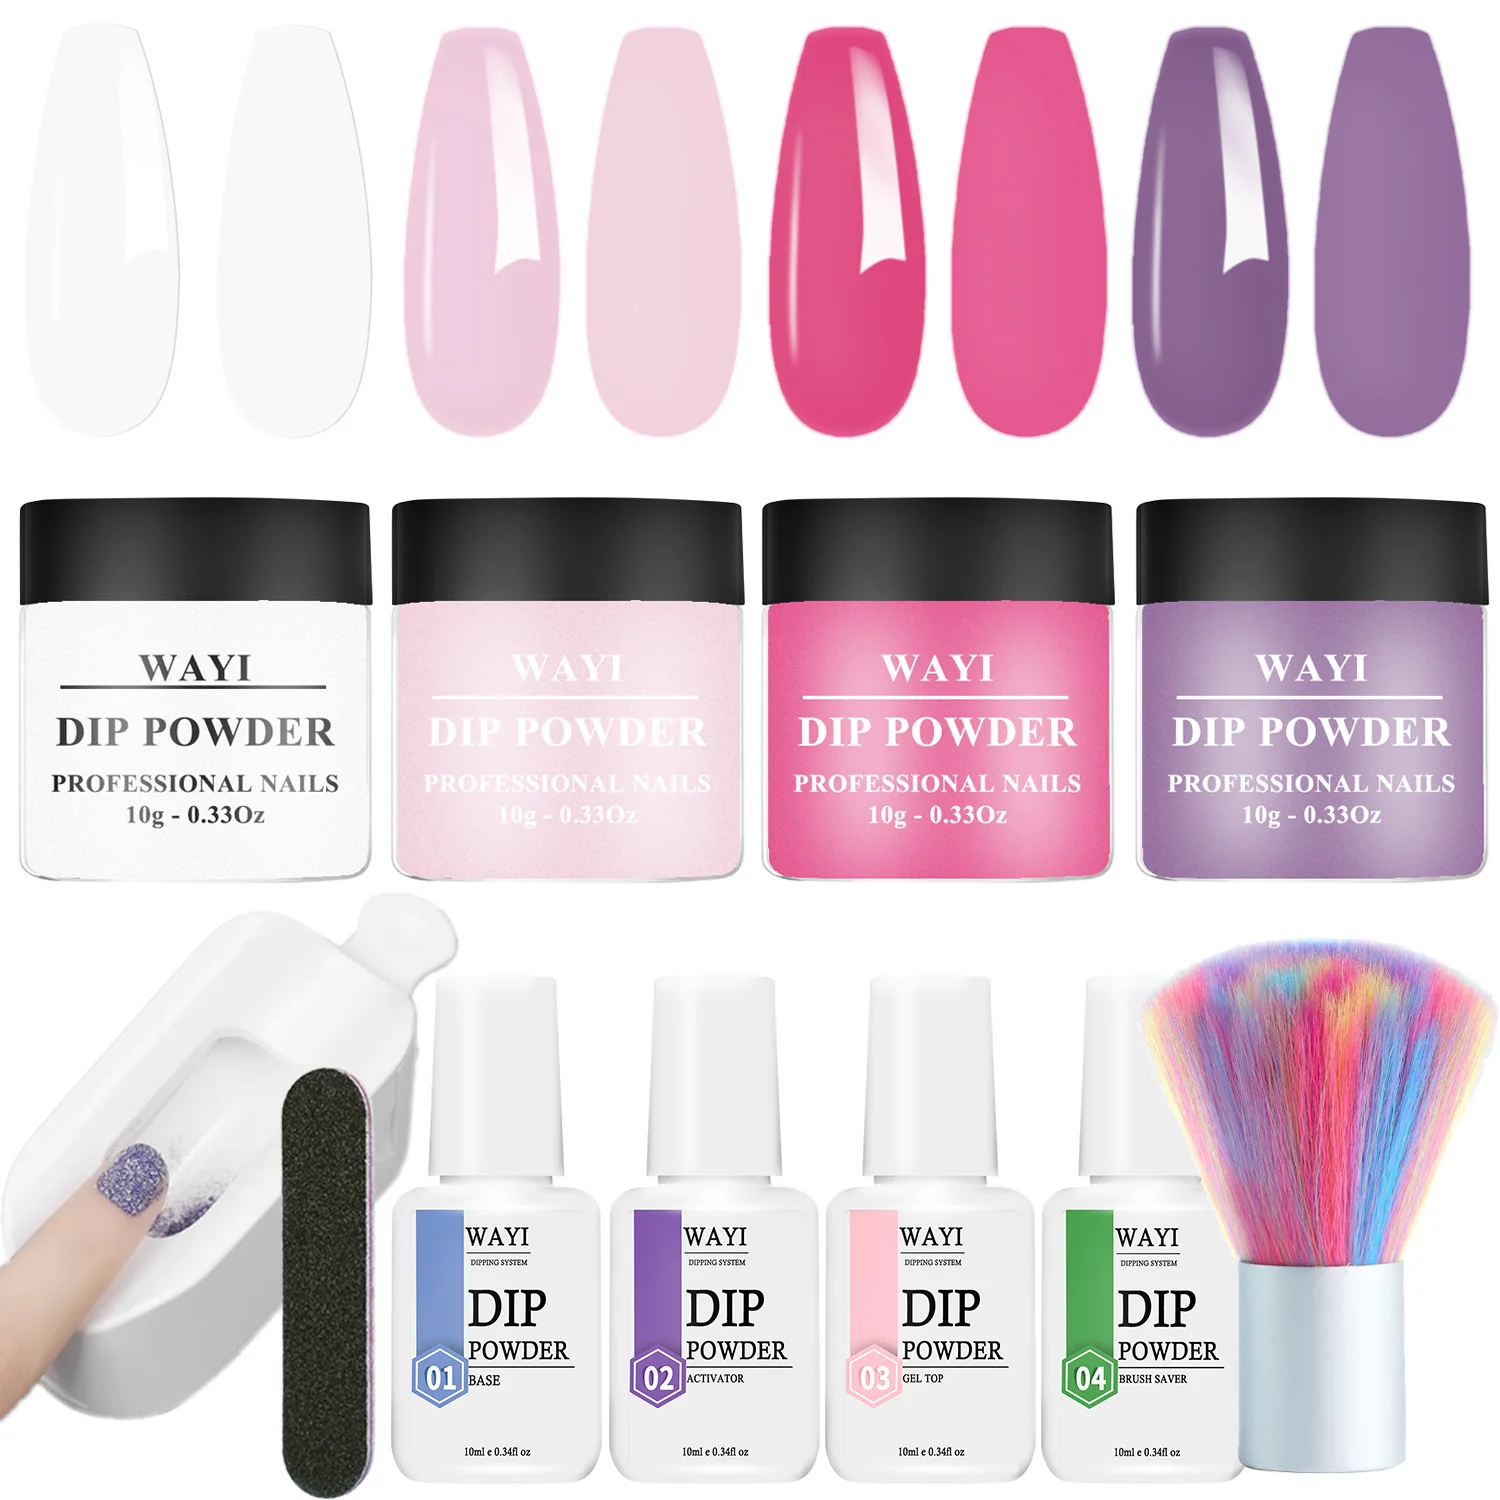 

Dip Powder Nail Kit Starter, 4 Colors Nude Pink Purple Dipping Powder Liquid Set with Base Top Coat Activator Nail Art Manicure